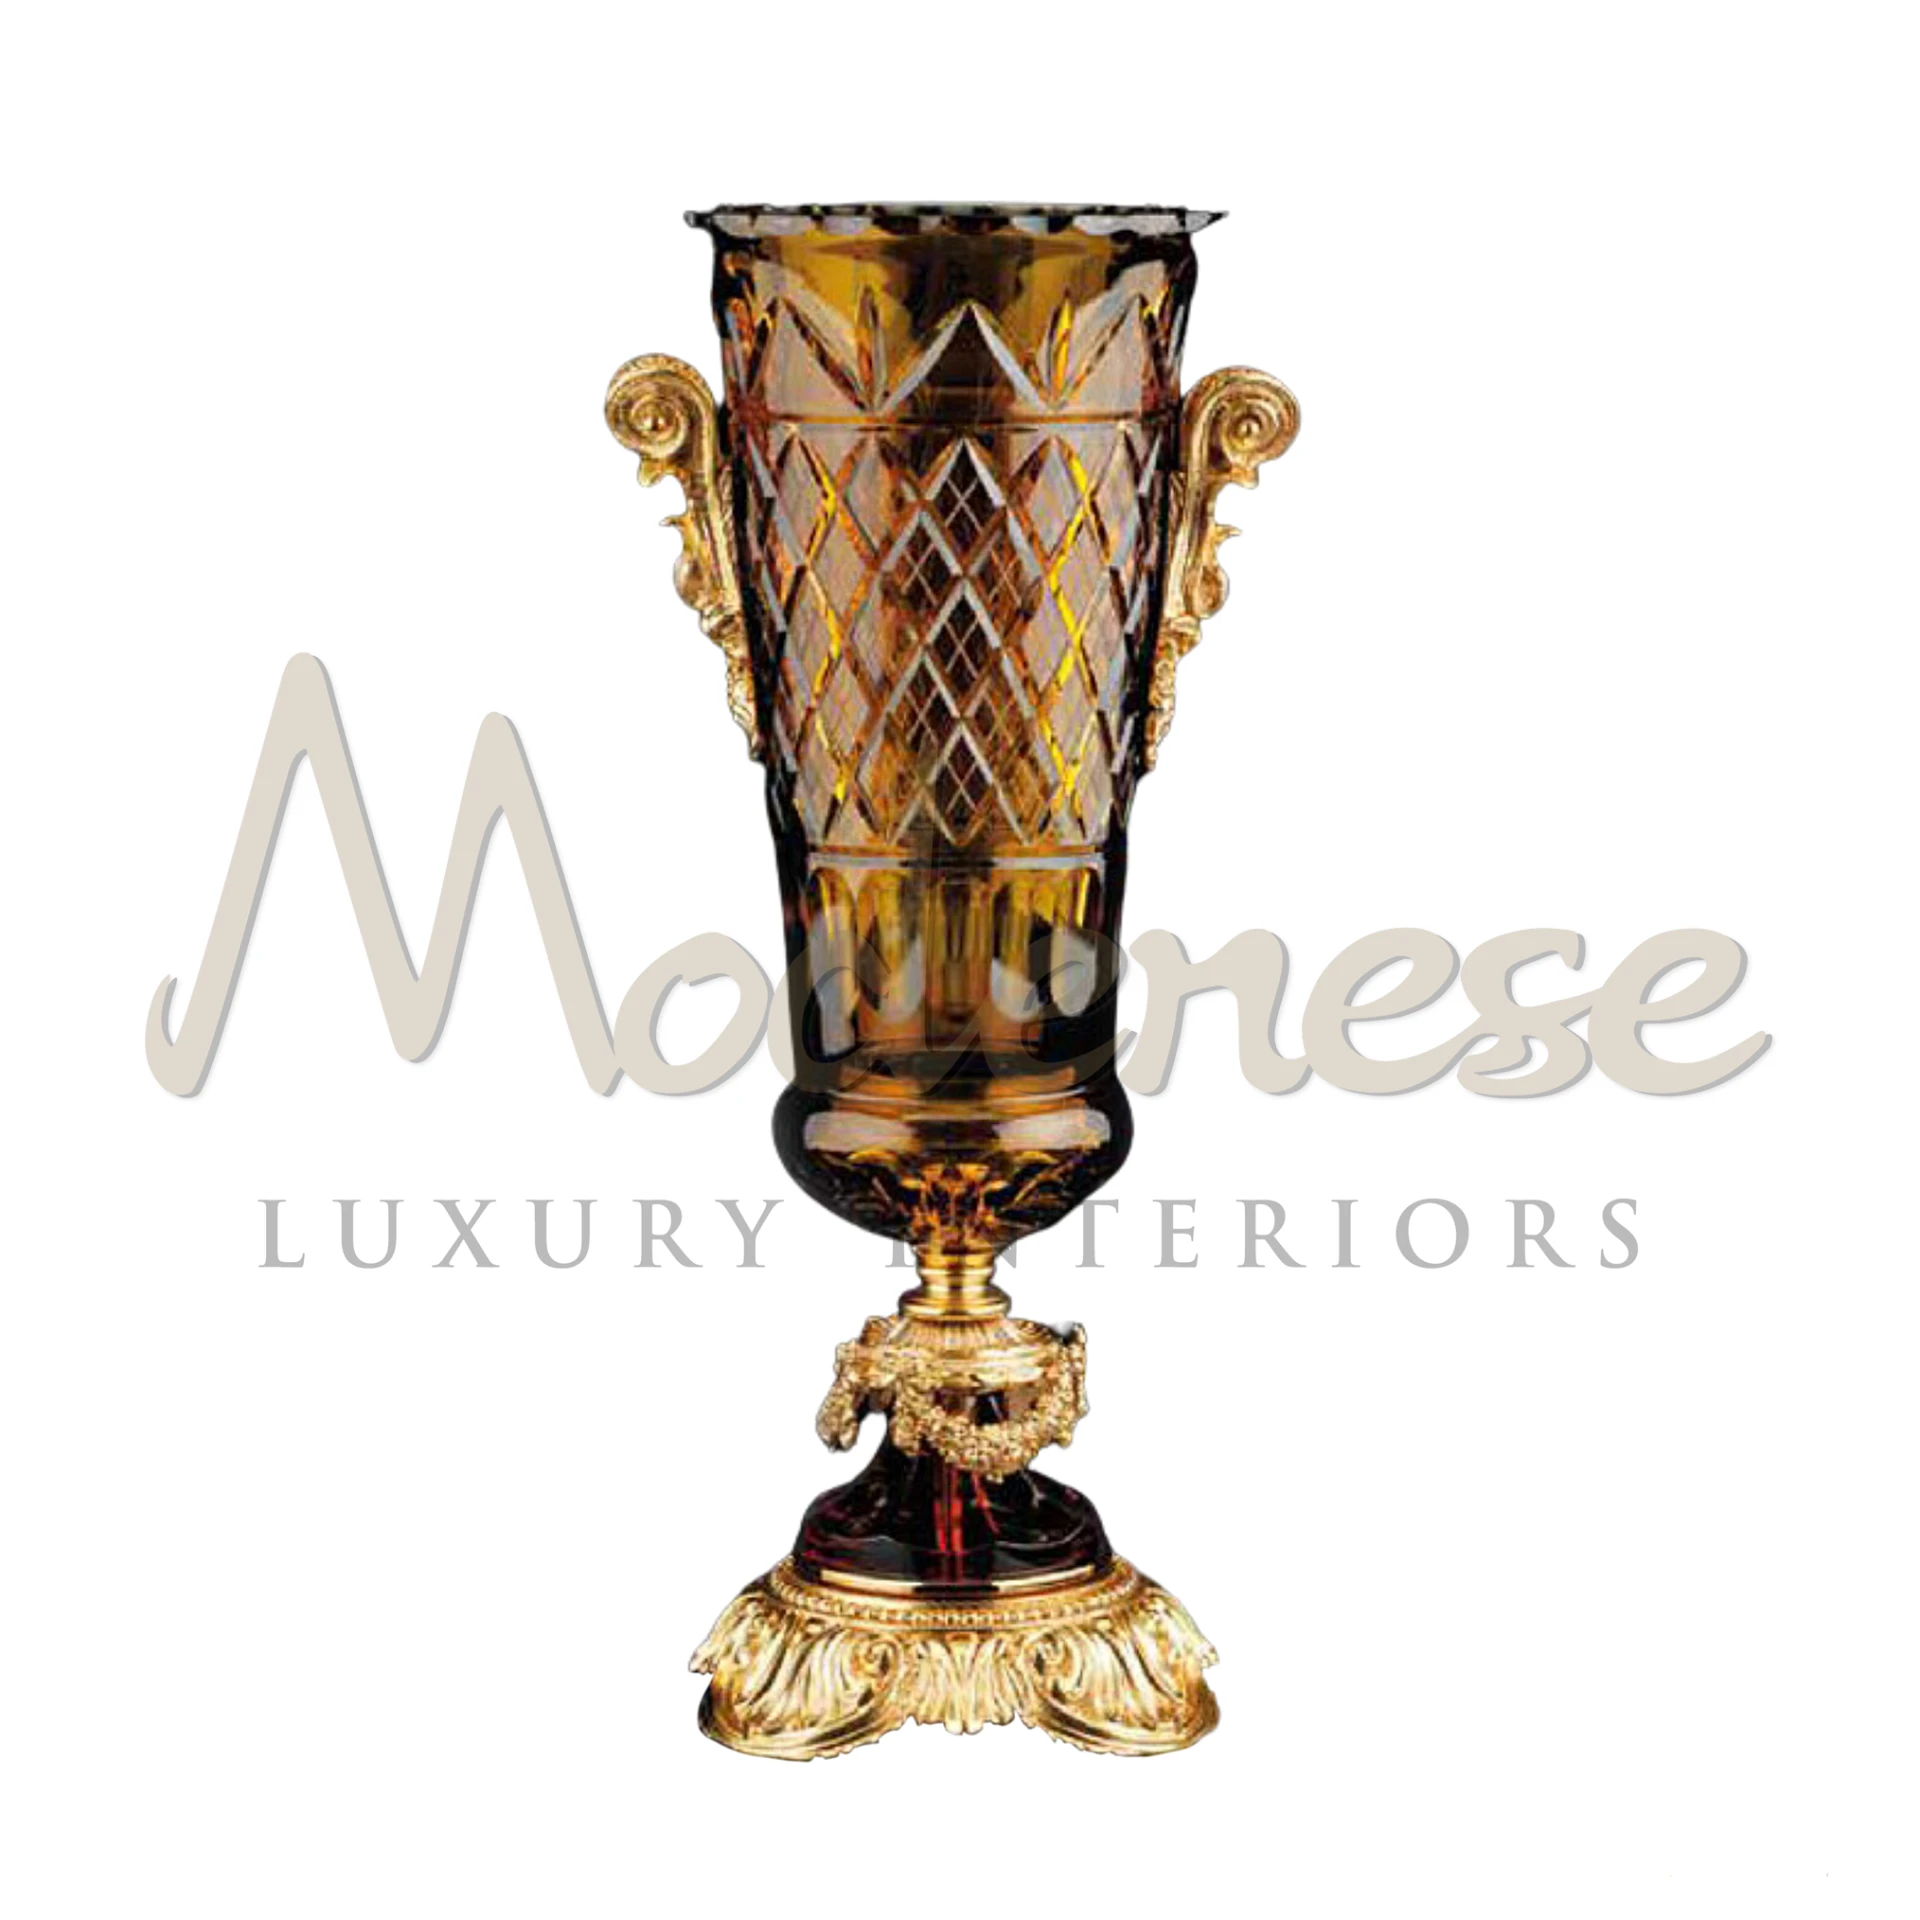 Elegant tall glass vase, slender with intricate designs, perfect for adding a touch of luxury and style to classic and baroque interior designs.






